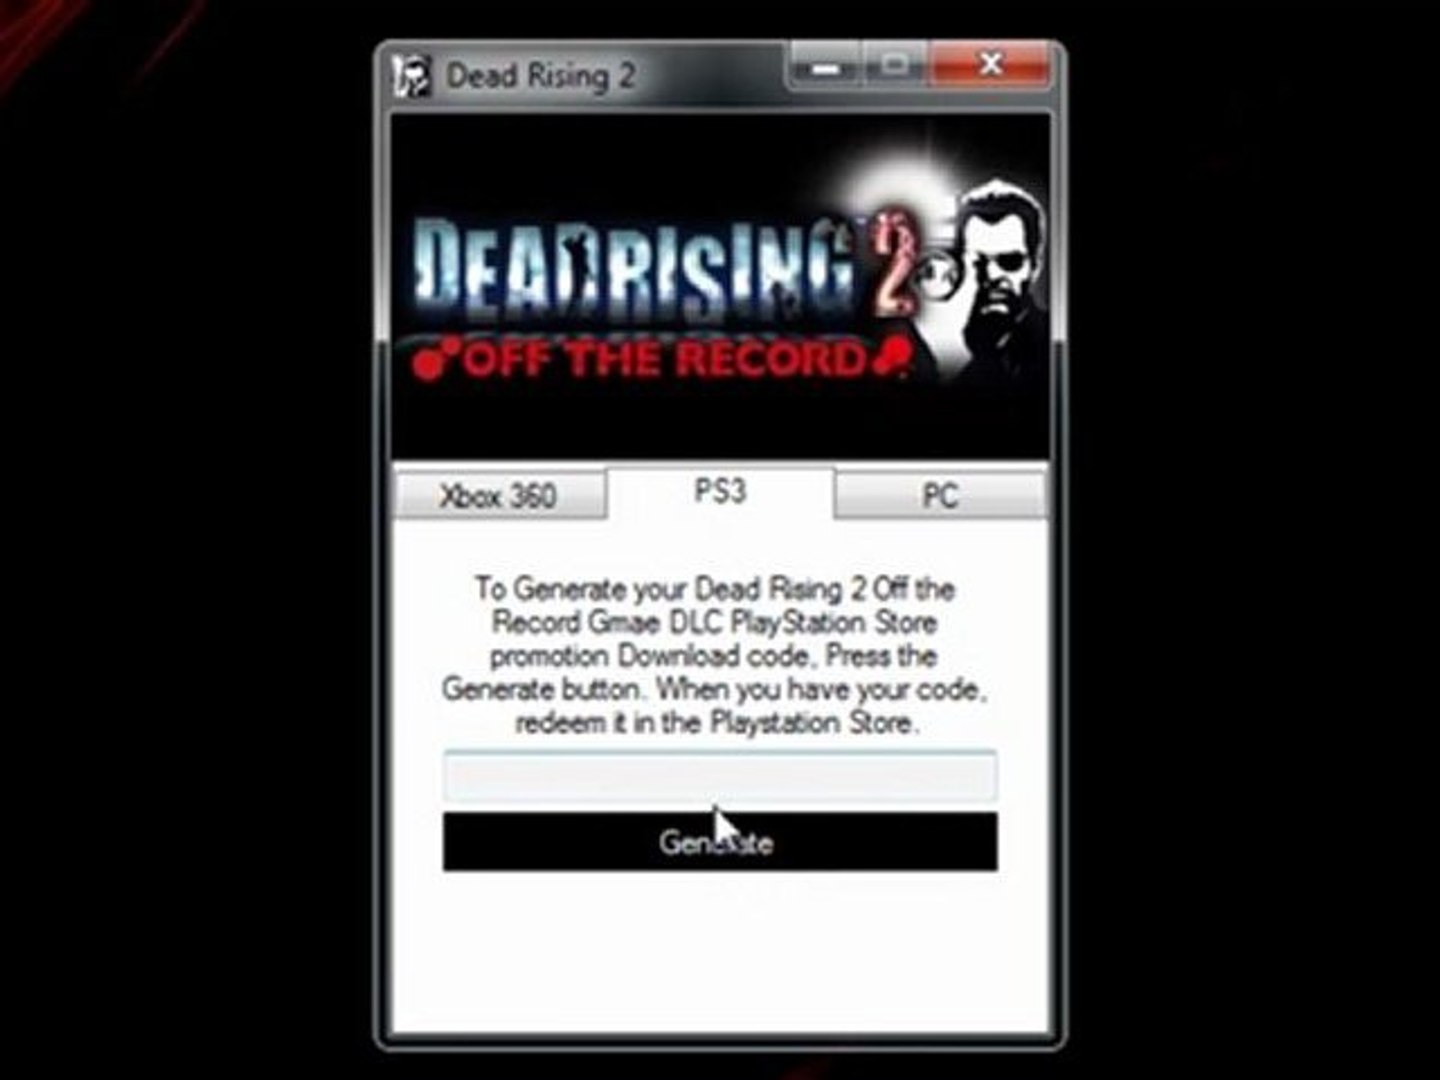 Dead Rising 2 Off the Record Game Crack Leaked - Free Download - video  Dailymotion